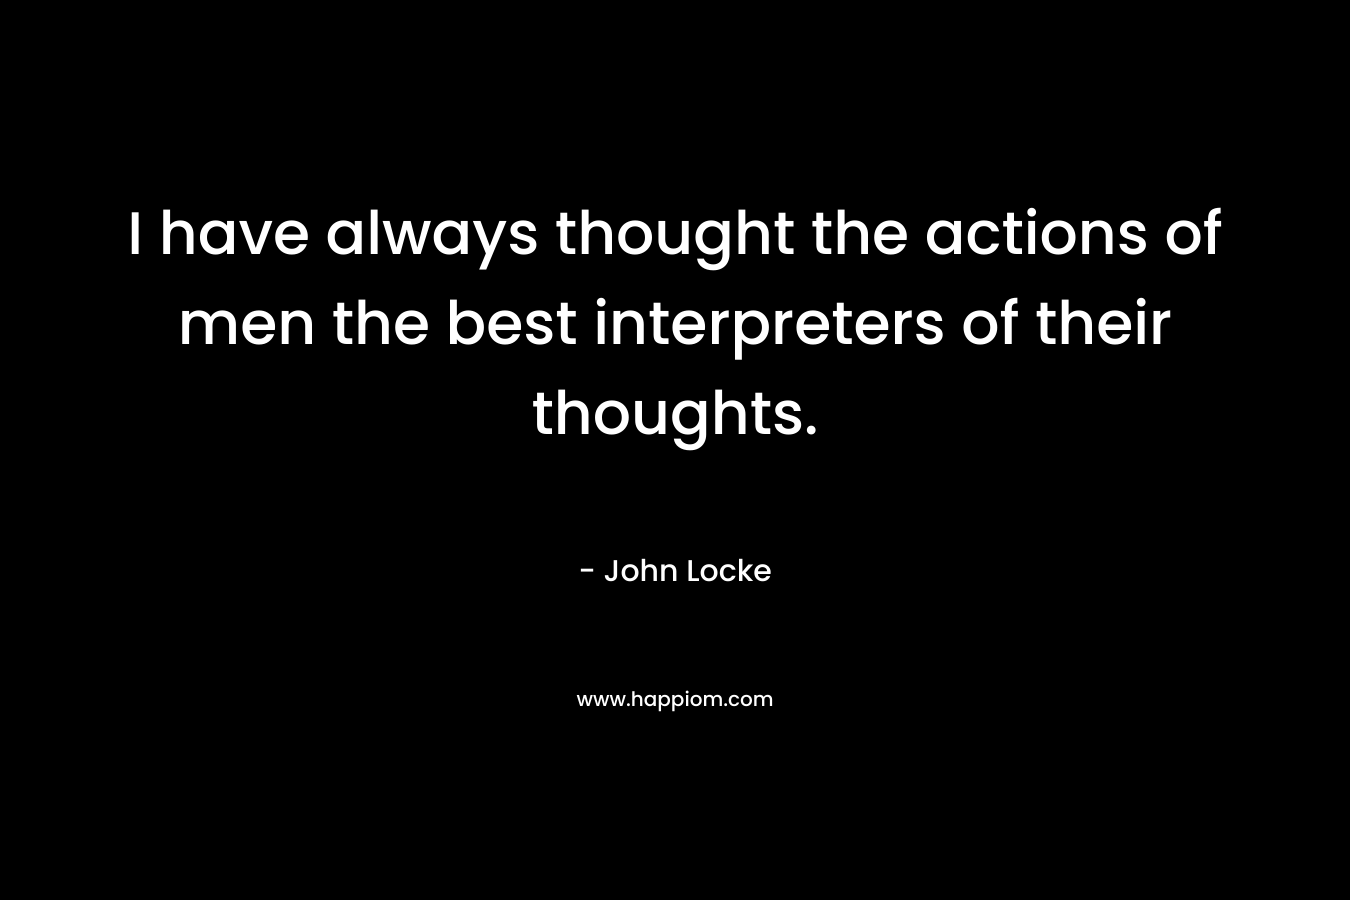 I have always thought the actions of men the best interpreters of their thoughts. – John Locke